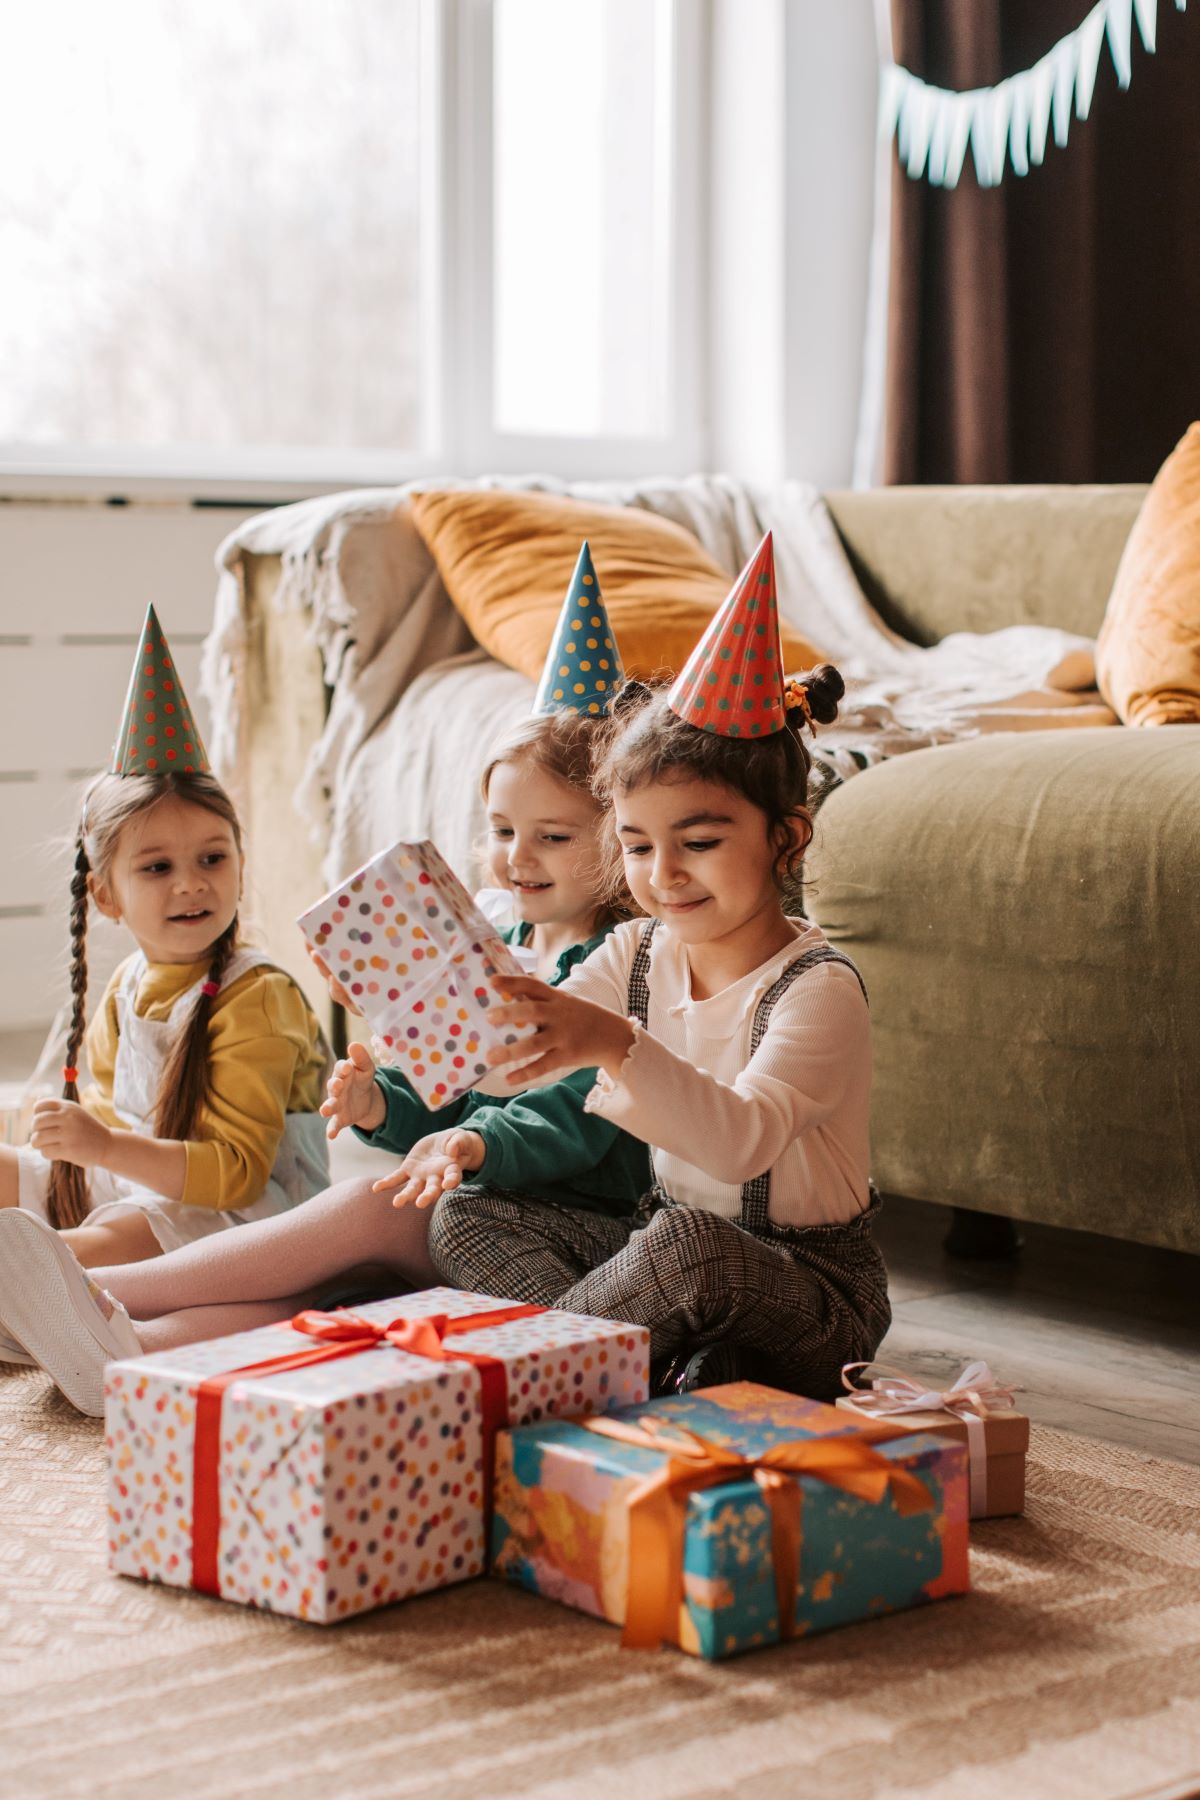 Children opening gifts at a birthday party